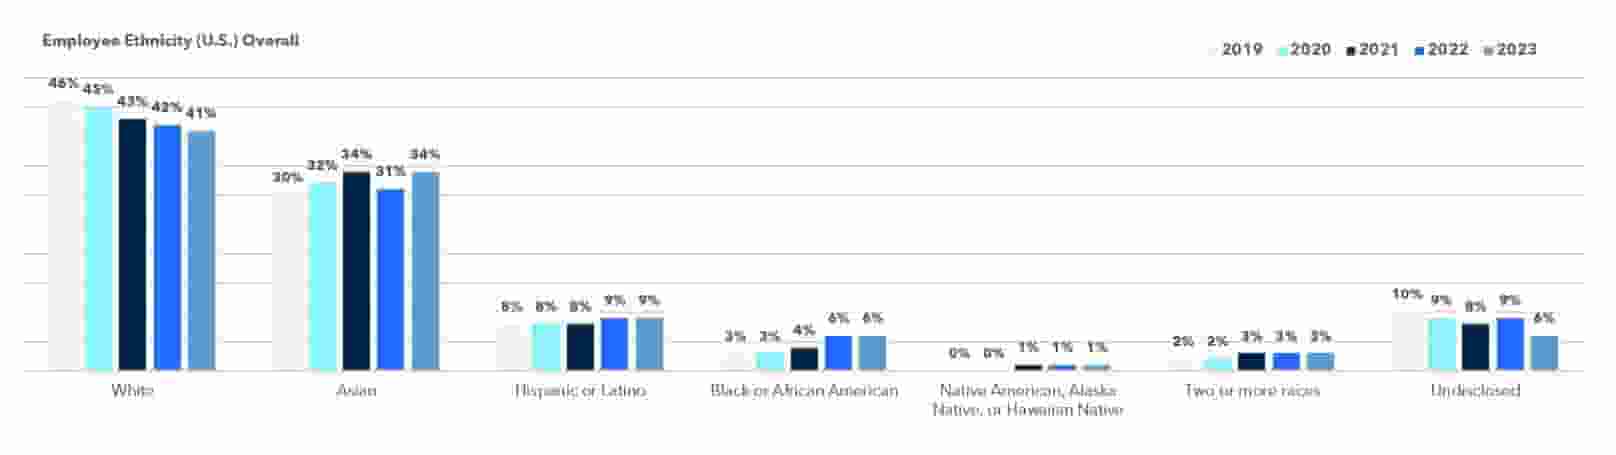 Overall Ethnicity Data in 2023